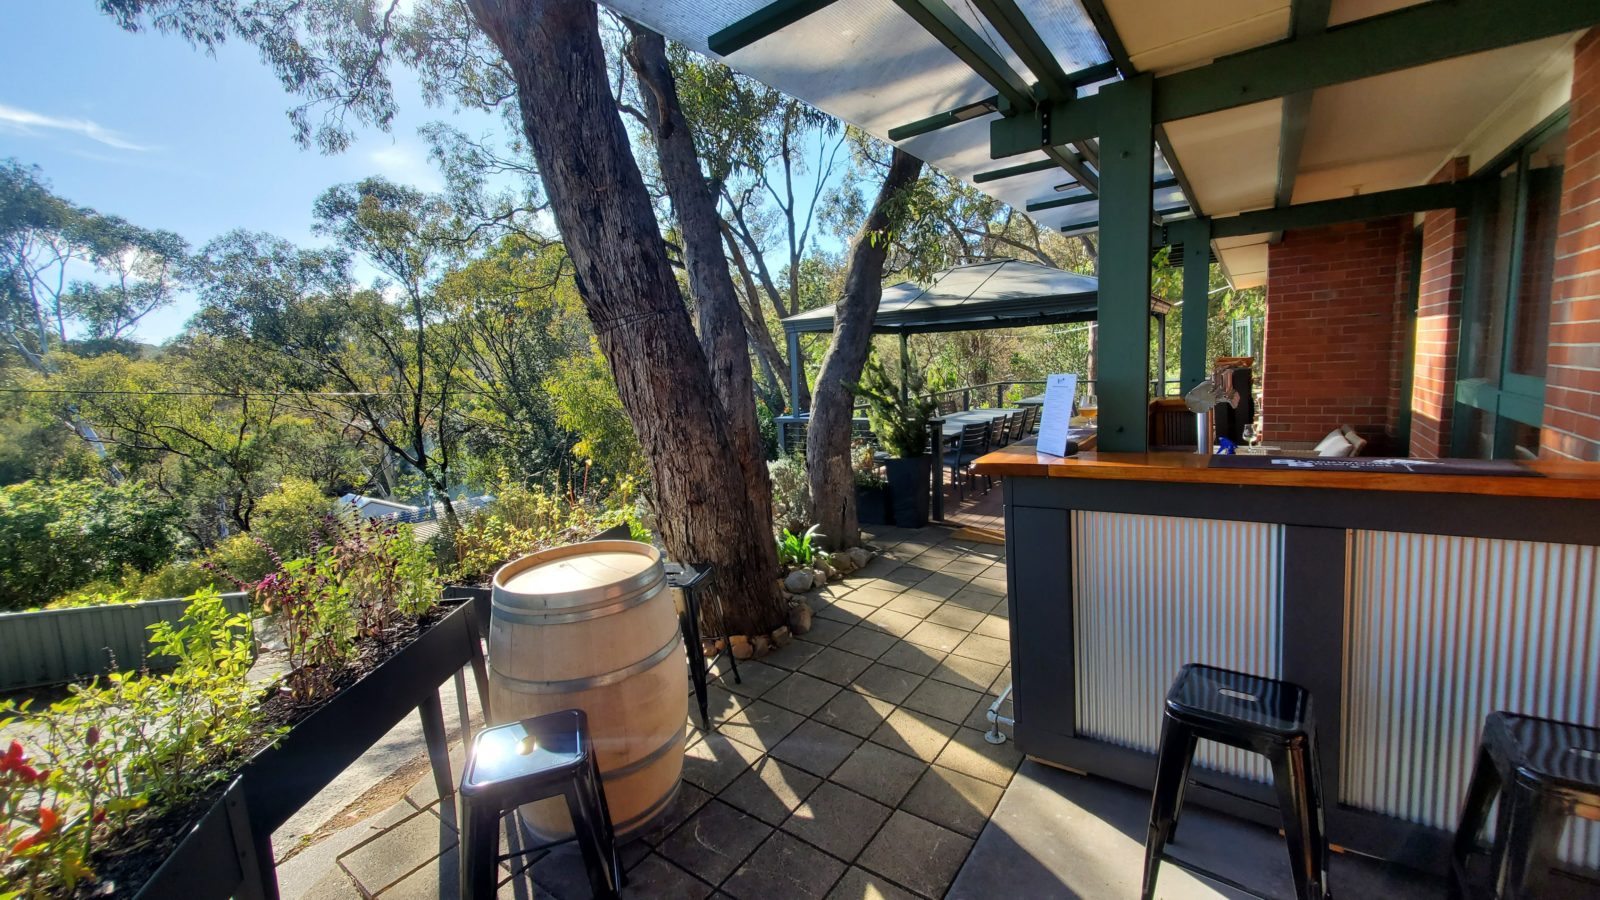 Outside bar and deck area